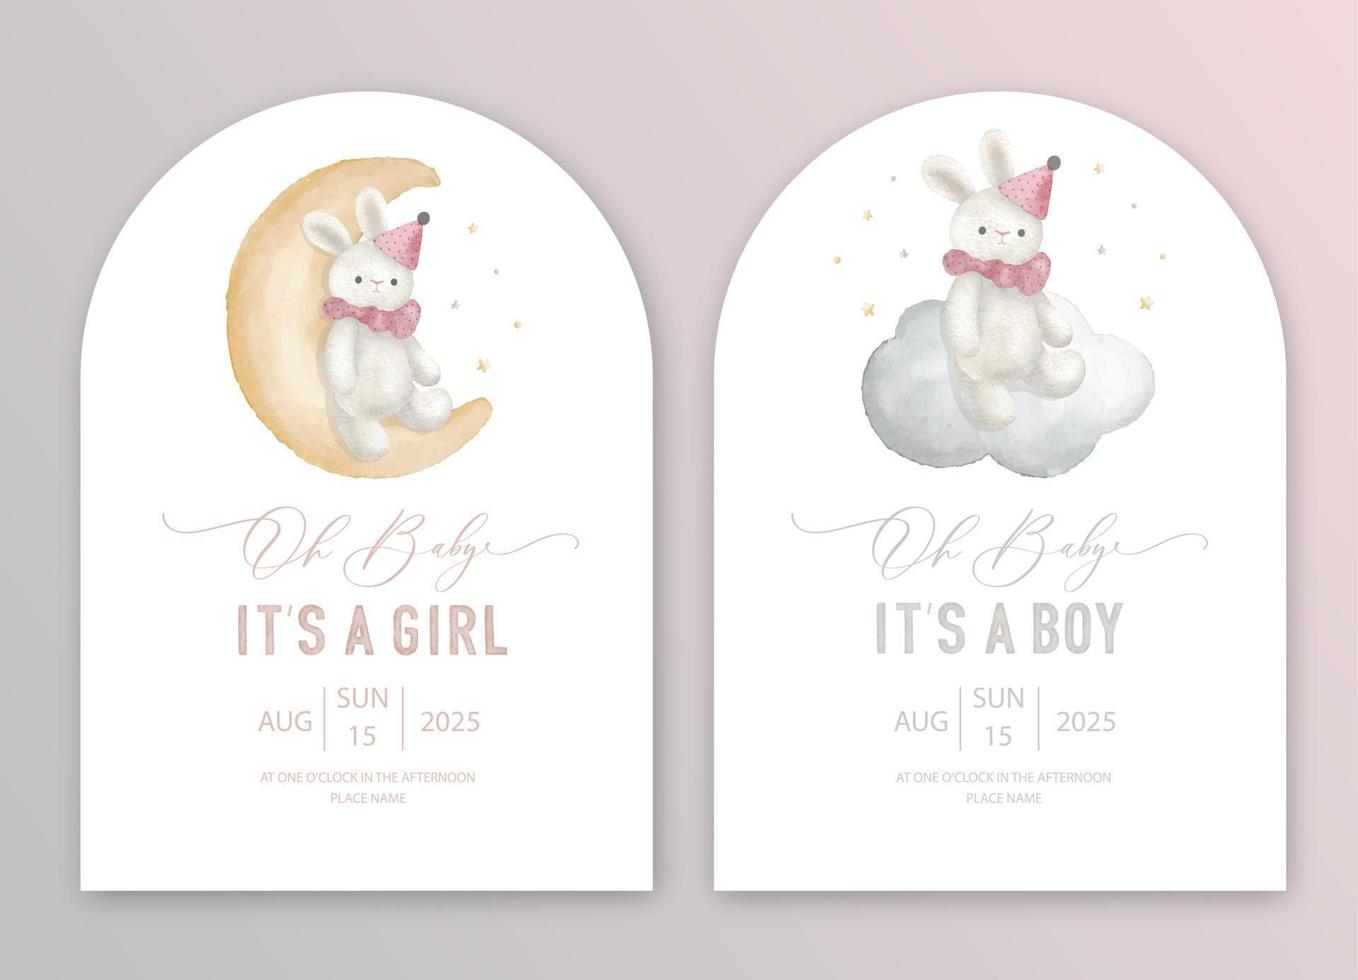 Cute baby shower watercolor invitation card for baby and kids new born celebration. Its a girl, Its a boy card with plush toy on the moon and cloud. vector